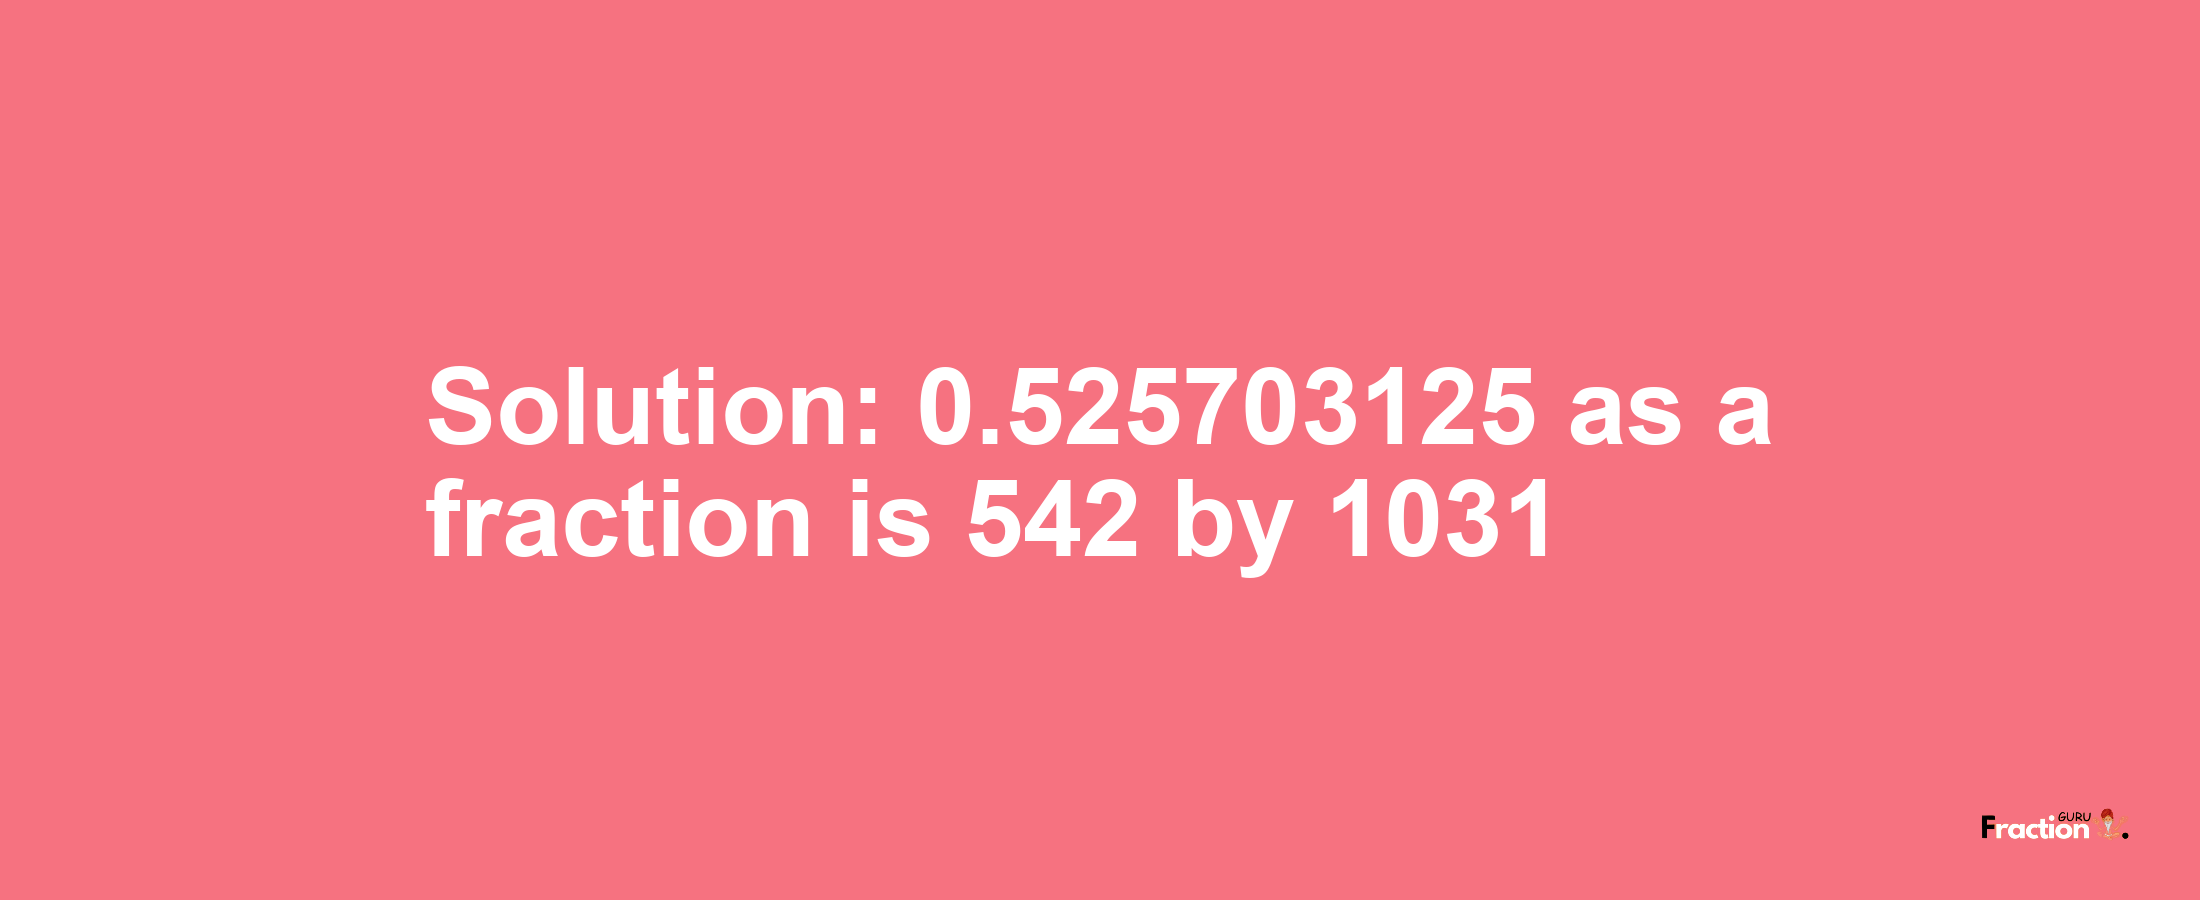 Solution:0.525703125 as a fraction is 542/1031